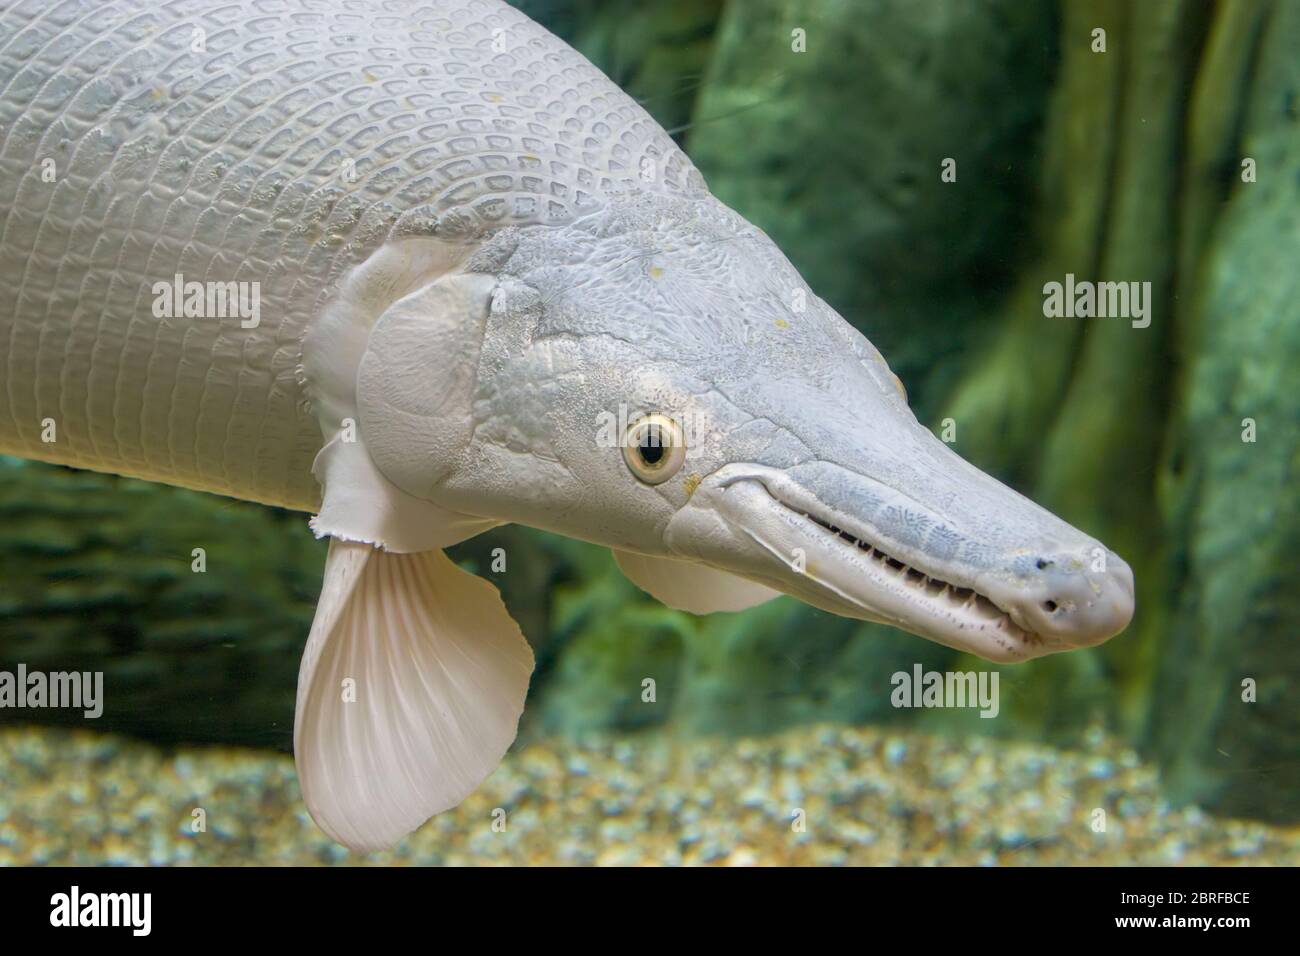 An  platinum  Alligator gar (Atractosteus spatula) in water. It is not albino because the eyes are black instead of red. Stock Photo